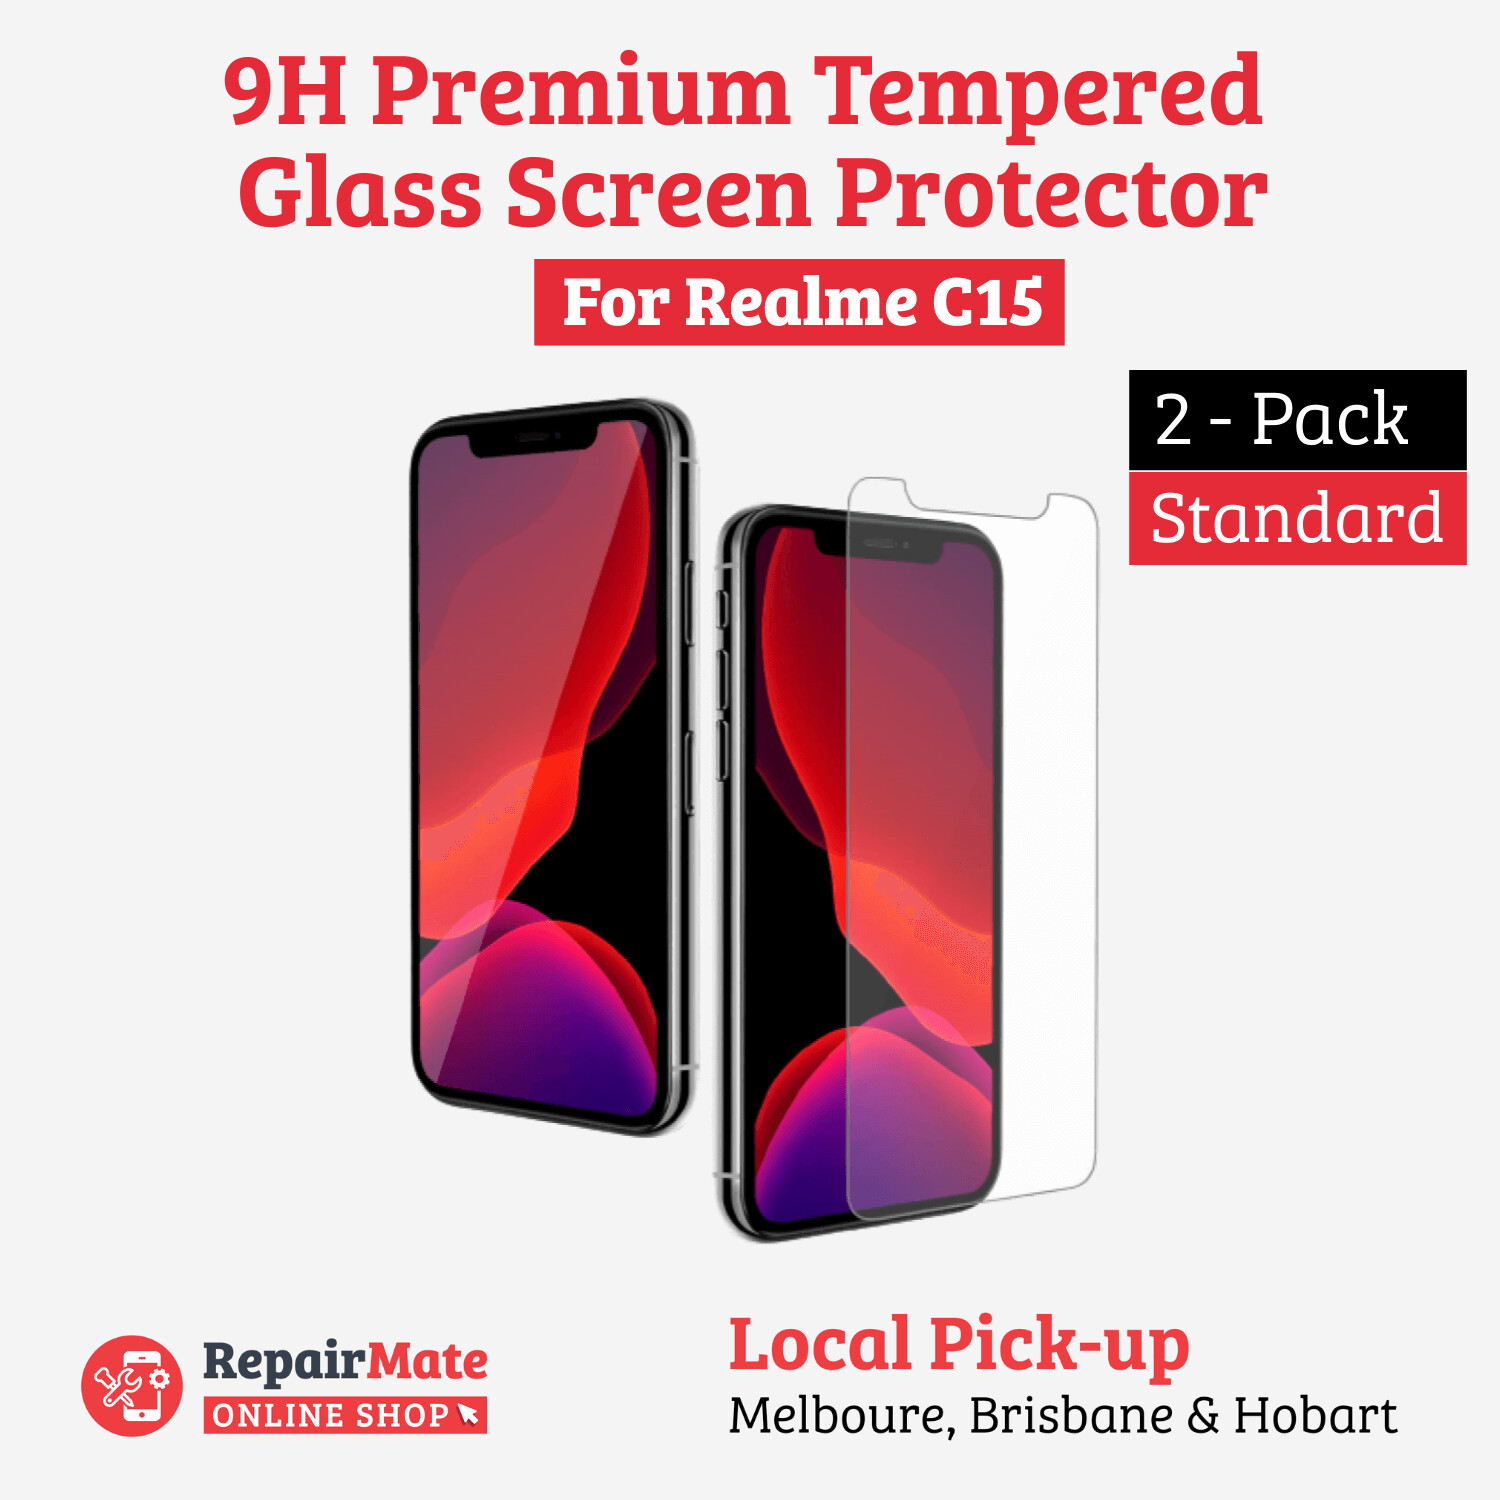 Realme C15 9H Premium Tempered Glass Screen Protector [2 Pack]